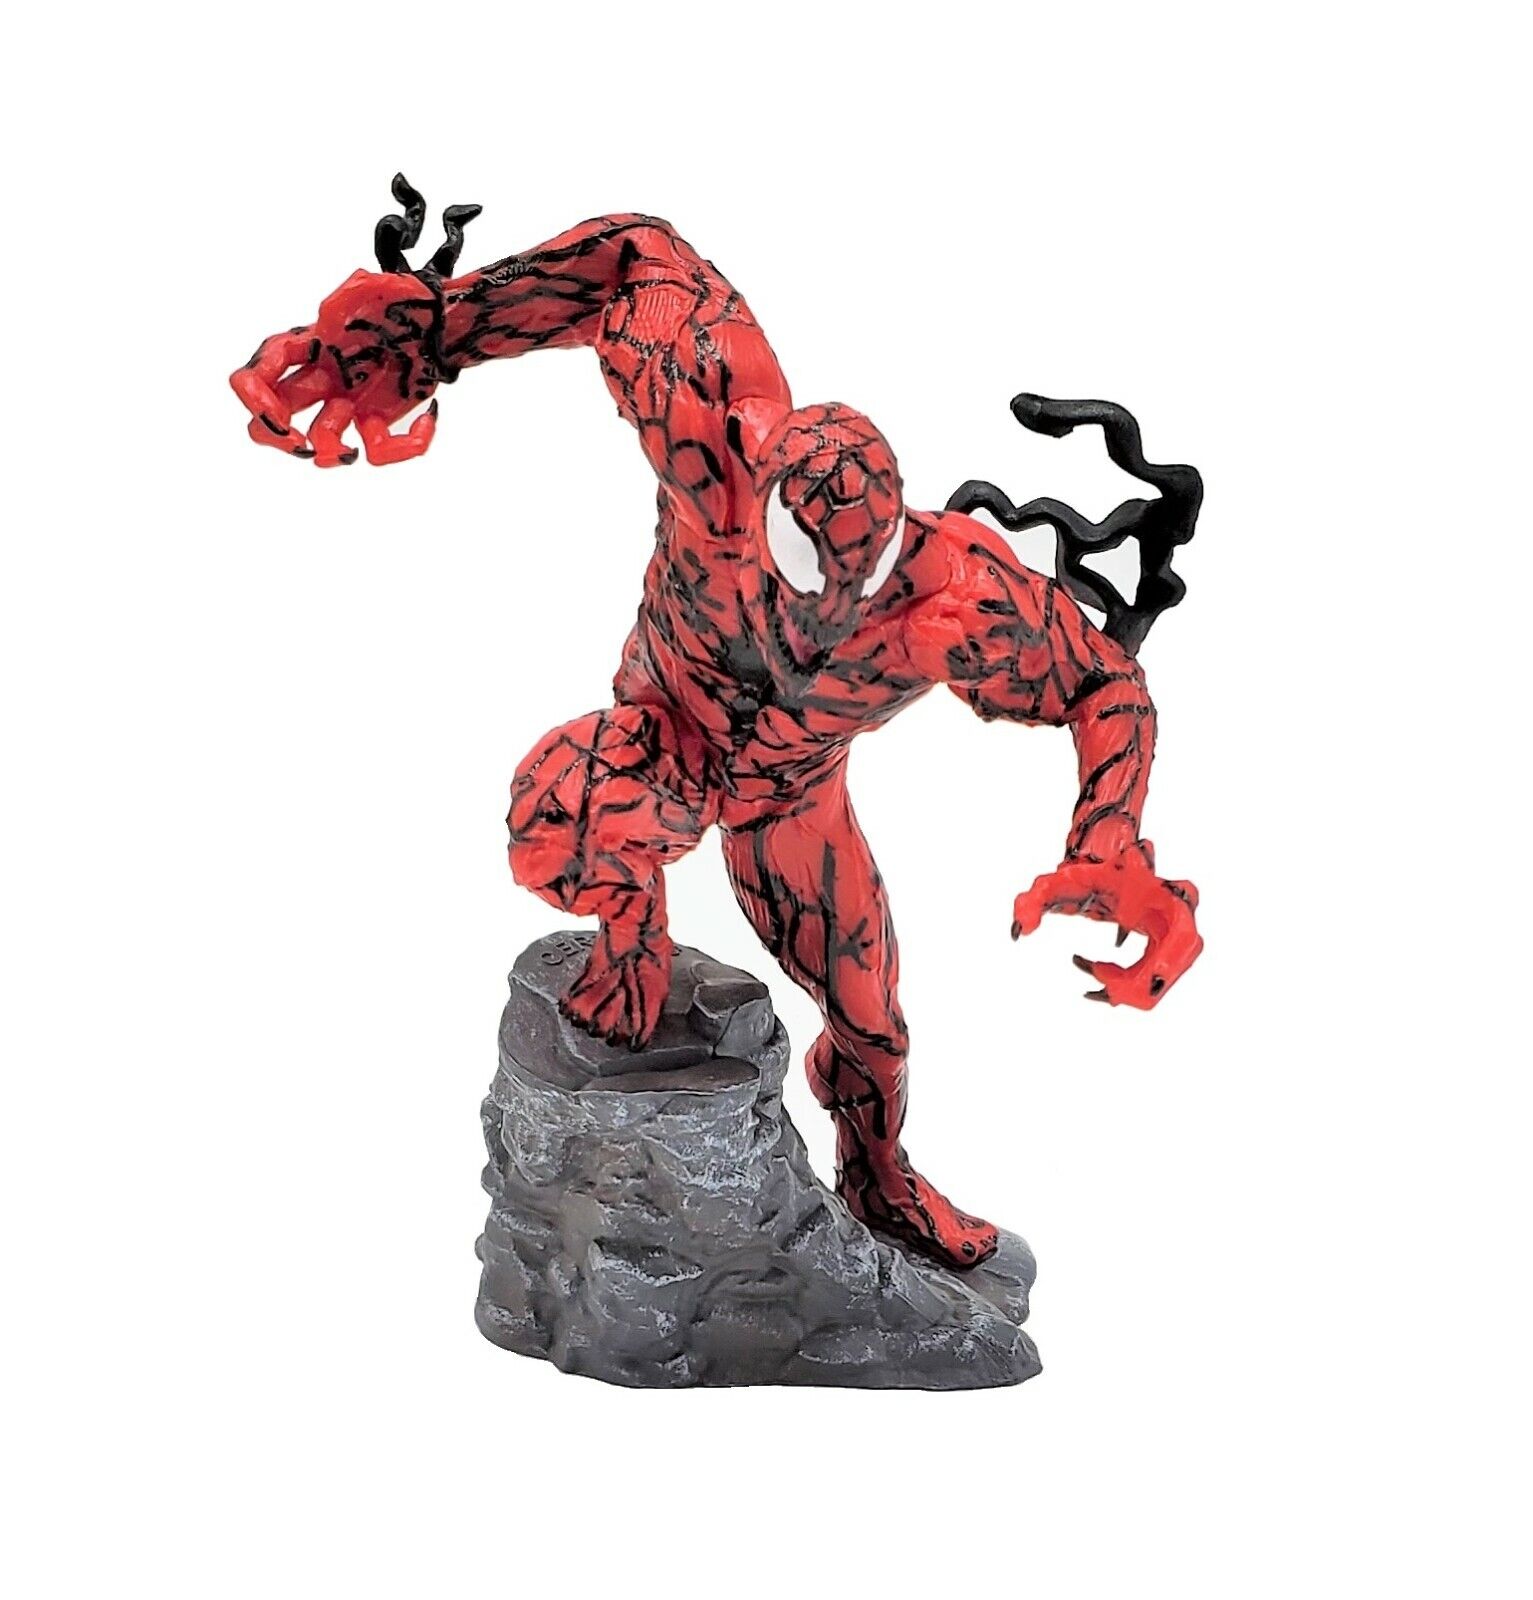 Ferocious Carnage Action Figure / Red Venom Action Figure Ready to Attack